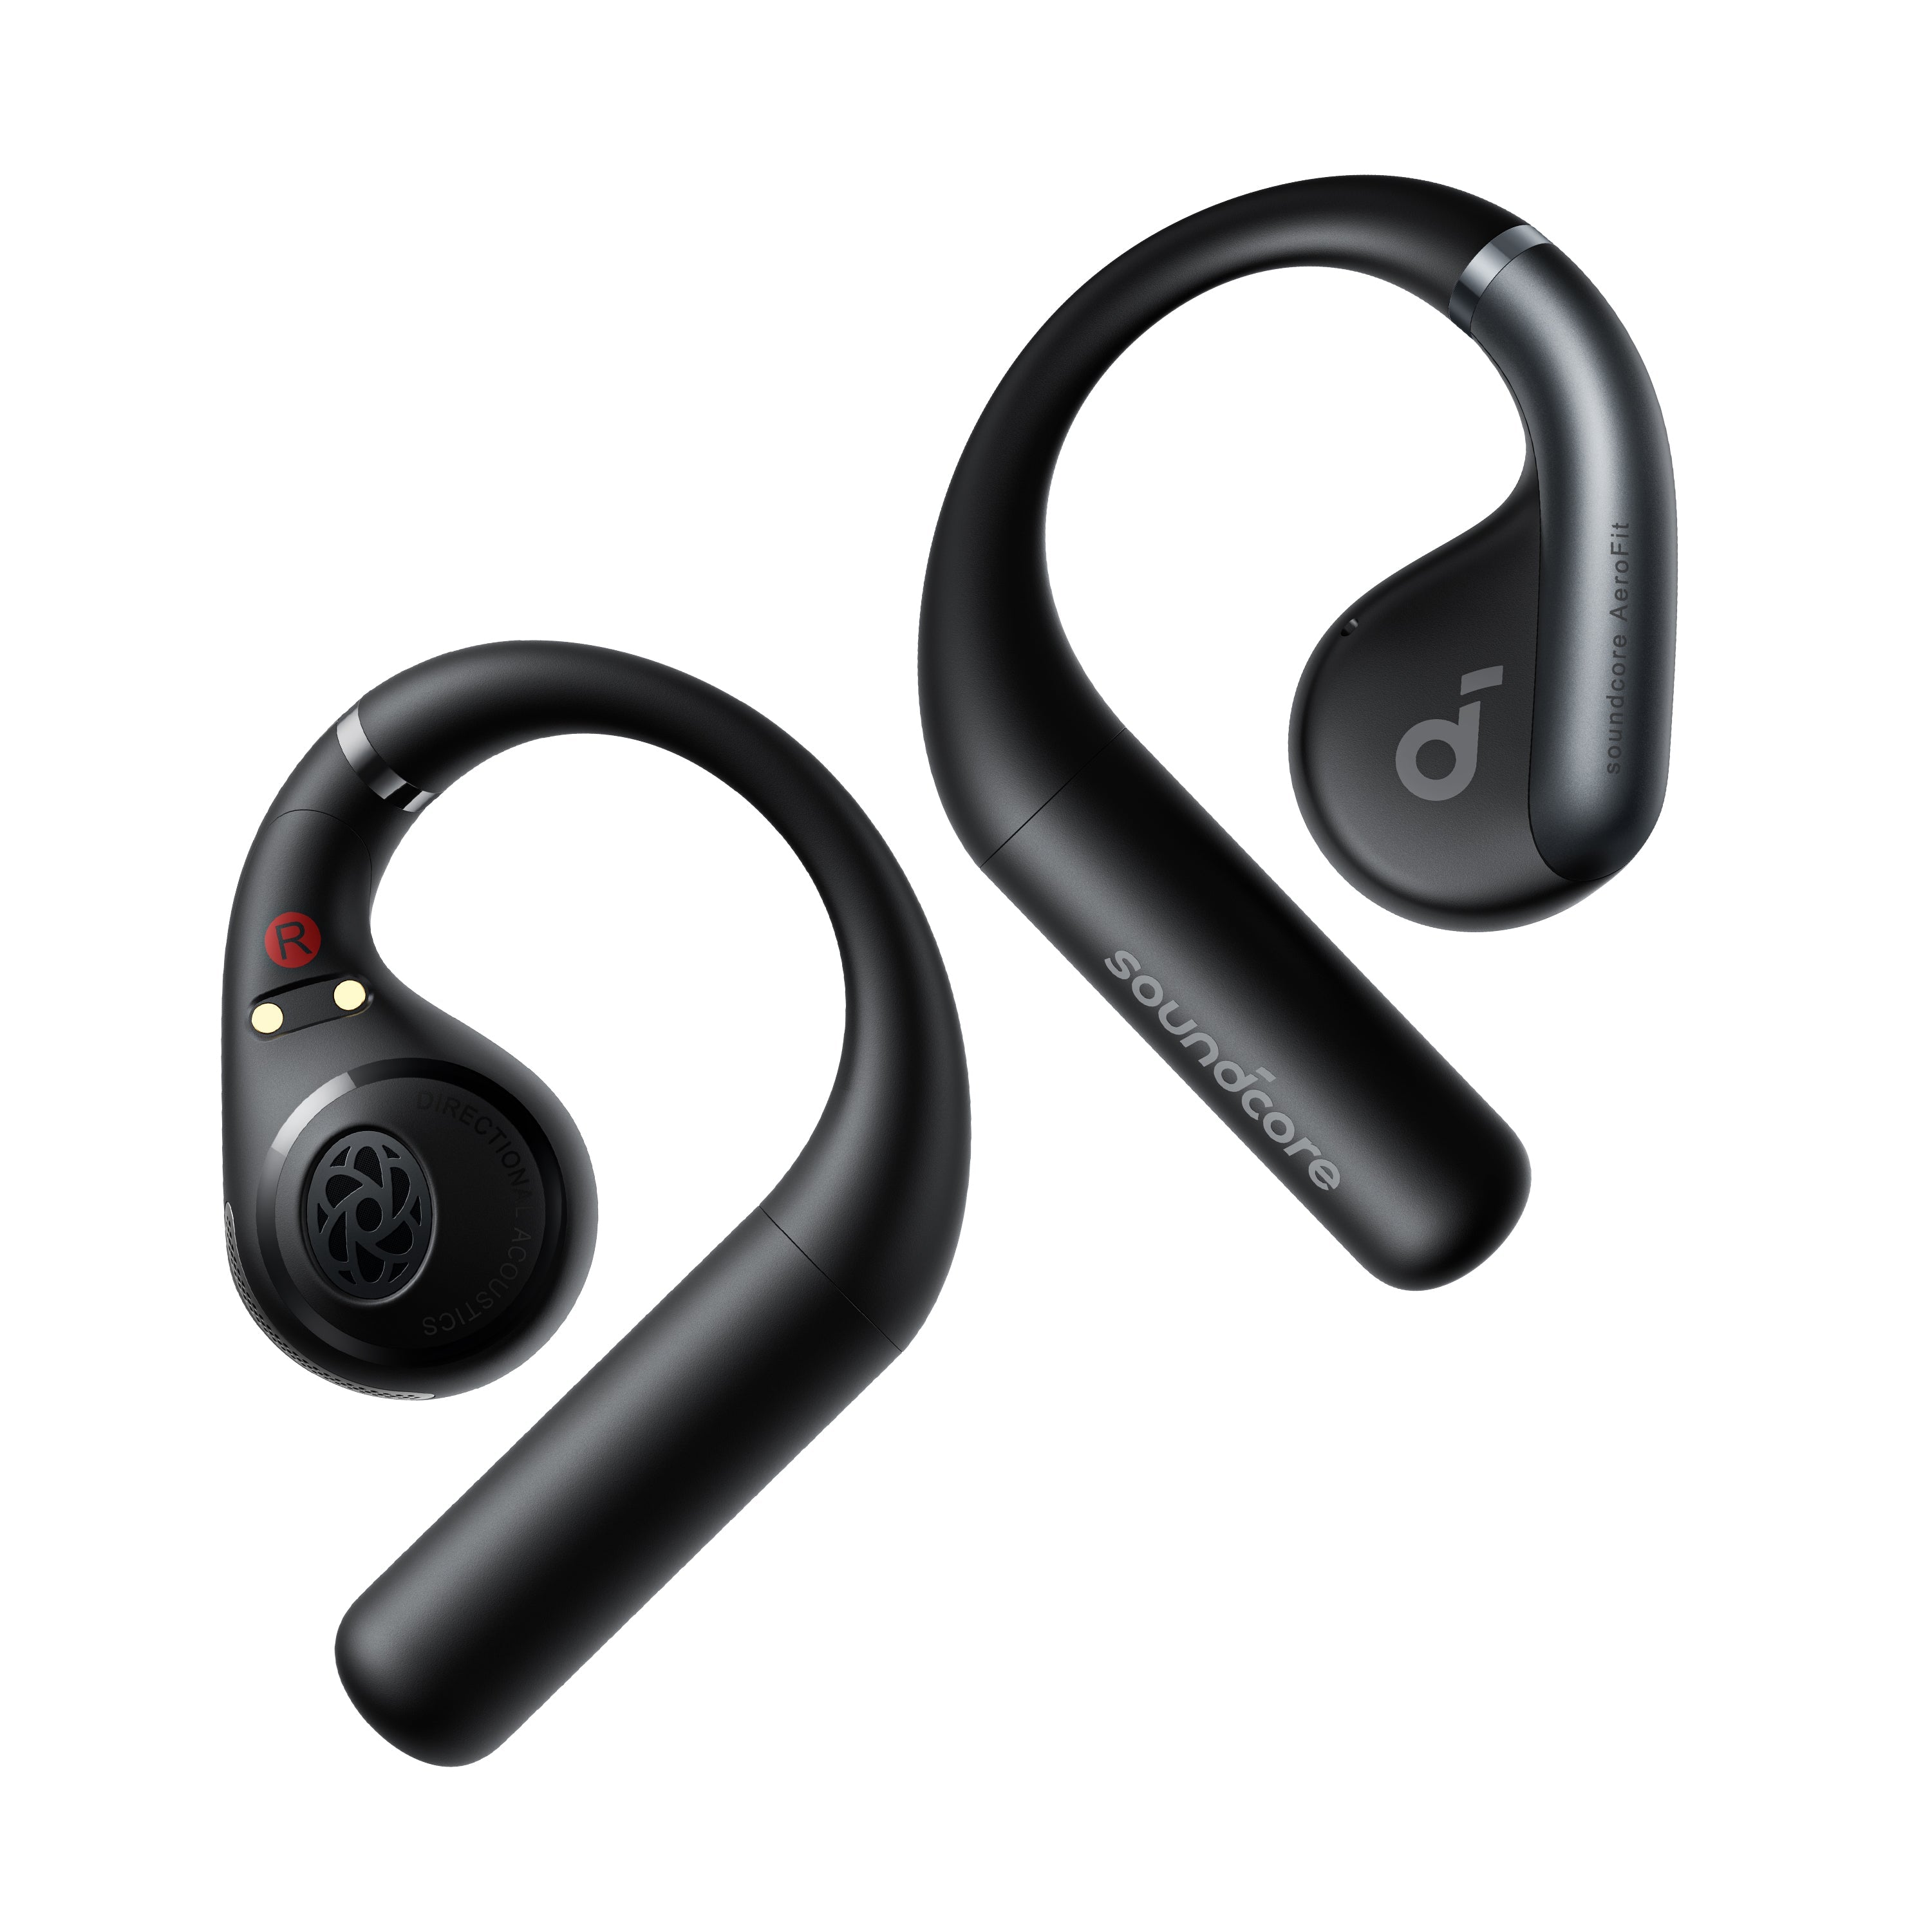 Soundcore - Q20i True Wireless In Ear Headphones Price and Features